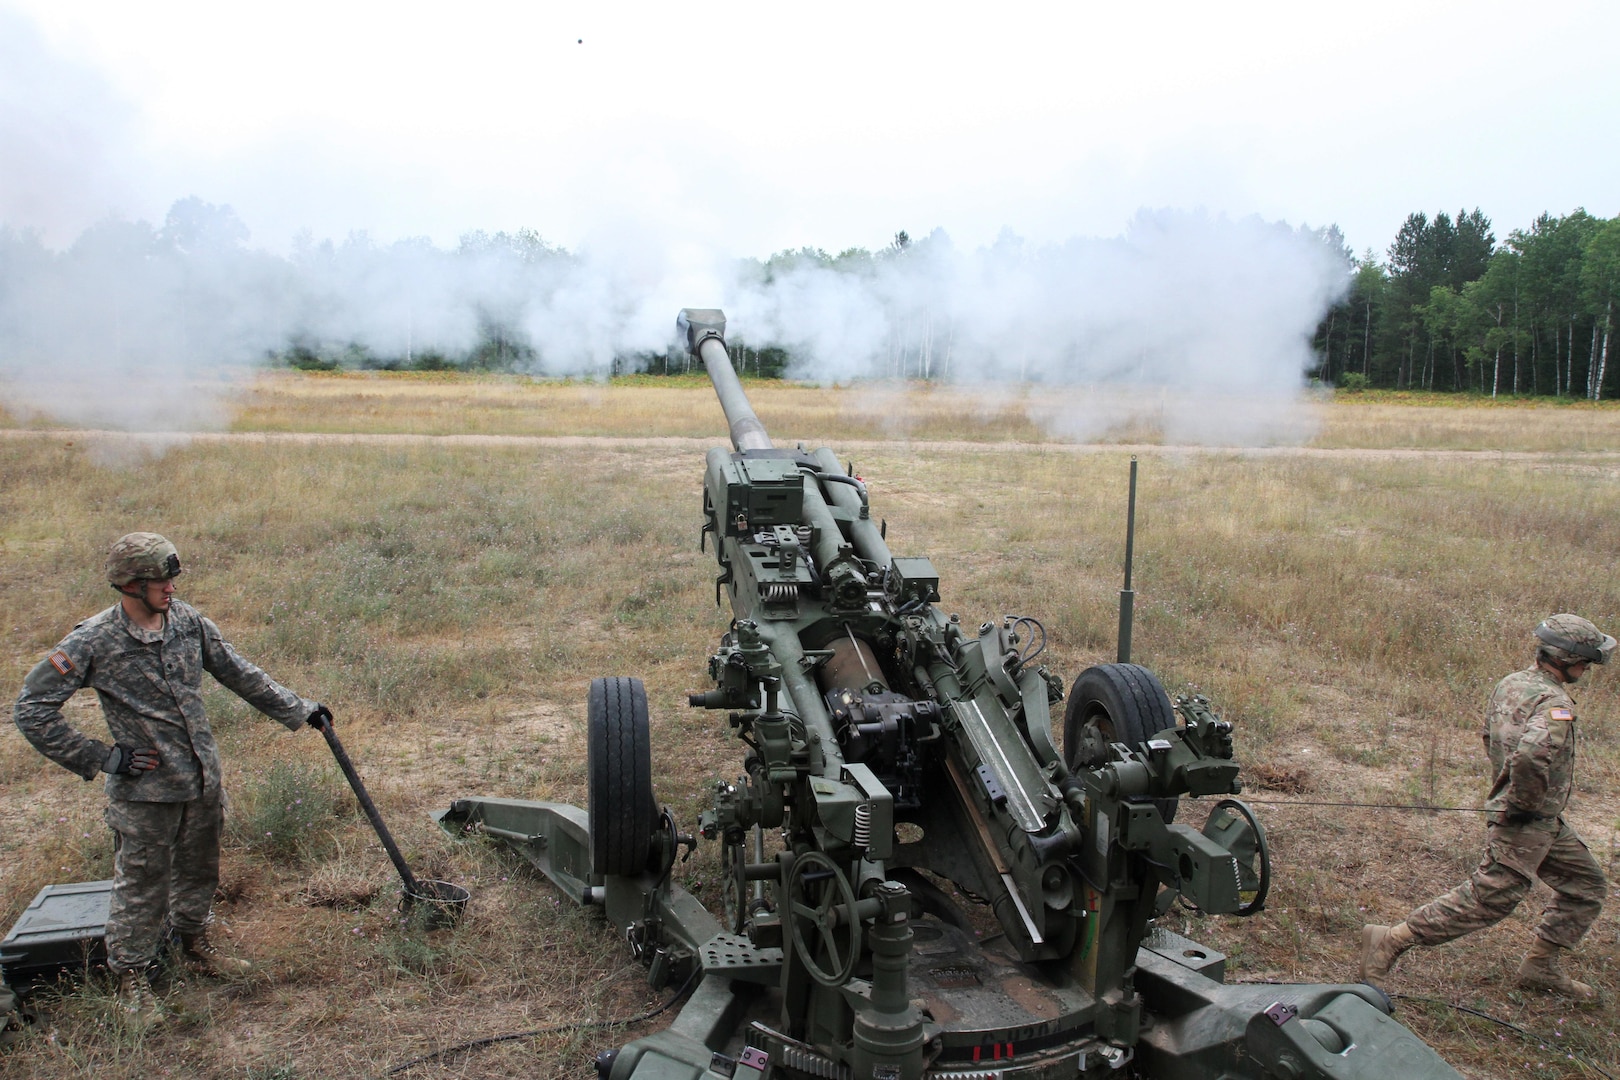 Soldiers from the 1st Battalion, 119th Field Artillery Charlie Battery out of Albion, Michigan, take part Exercise Northern Strike at the Camp Grayling Joint Maneuver Training Center. The Soldiers are responding to a call for fire by firing the M 777 "Howitzer" 155 mm Aug. 12 2016.